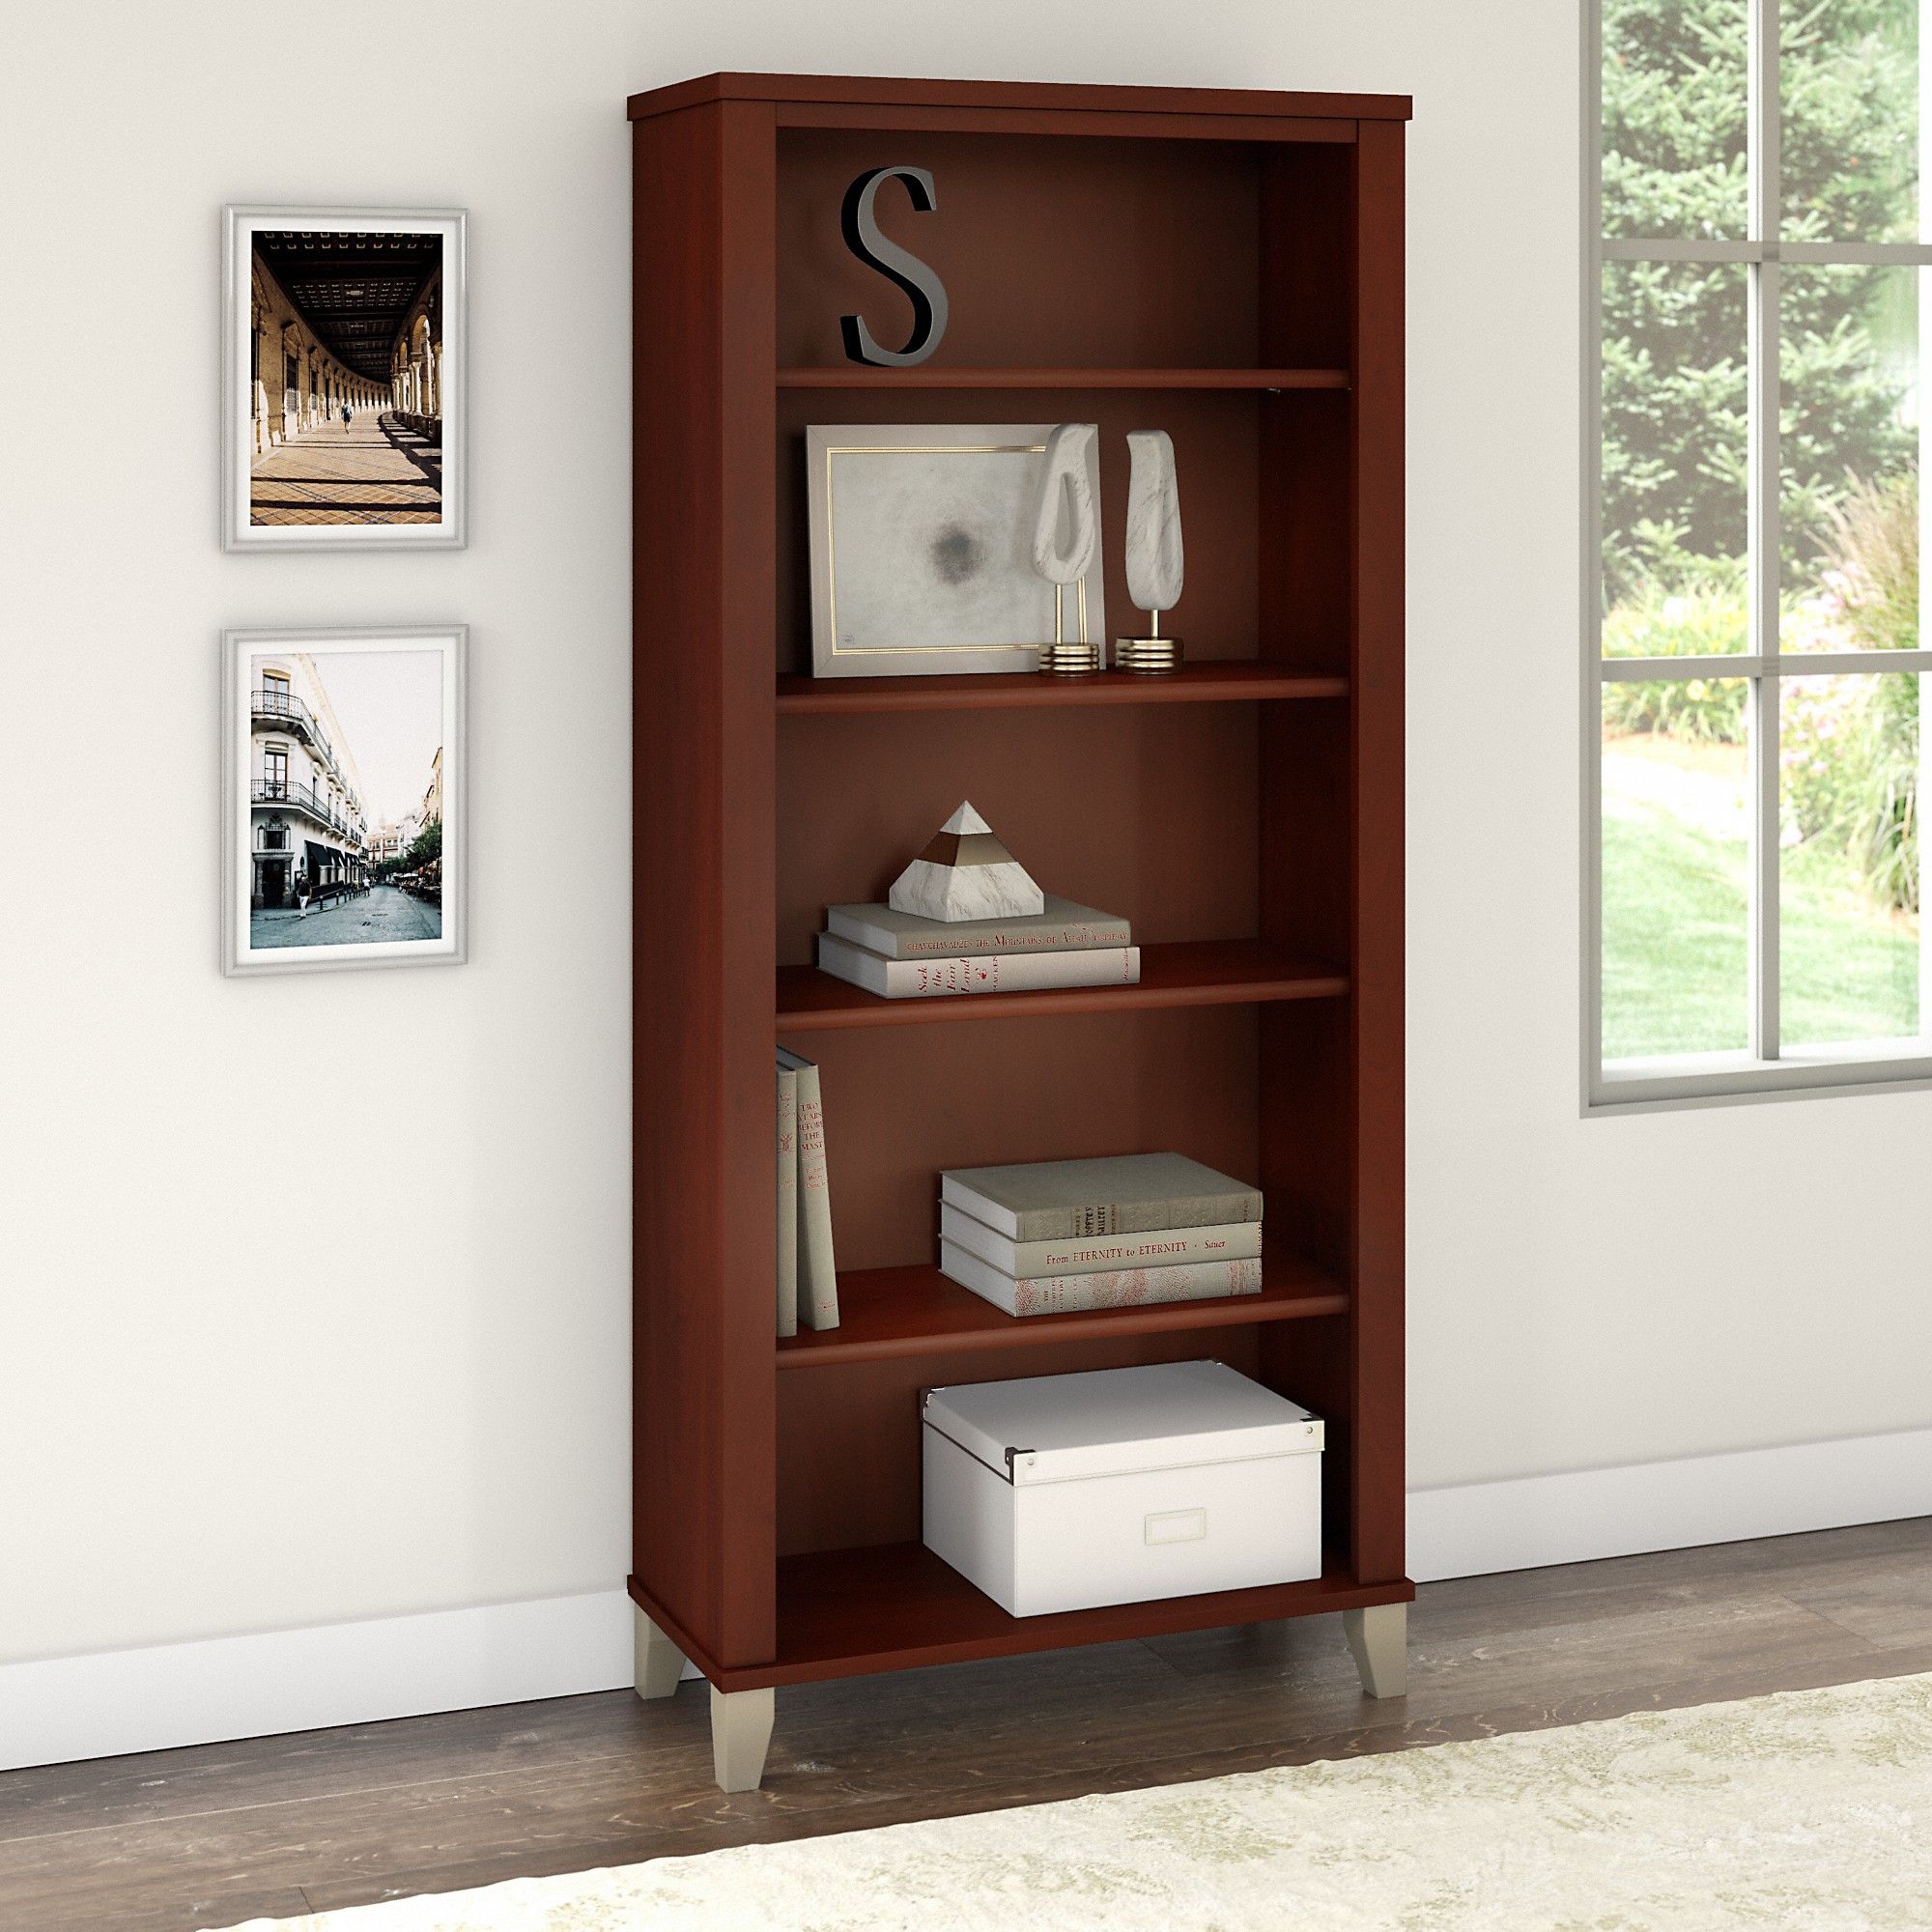 Bush Furniture Somerset Tall 5 Shelf Bookcase Wc81765 Intended For Five Shelf Bookcases With Drawer (View 14 of 15)